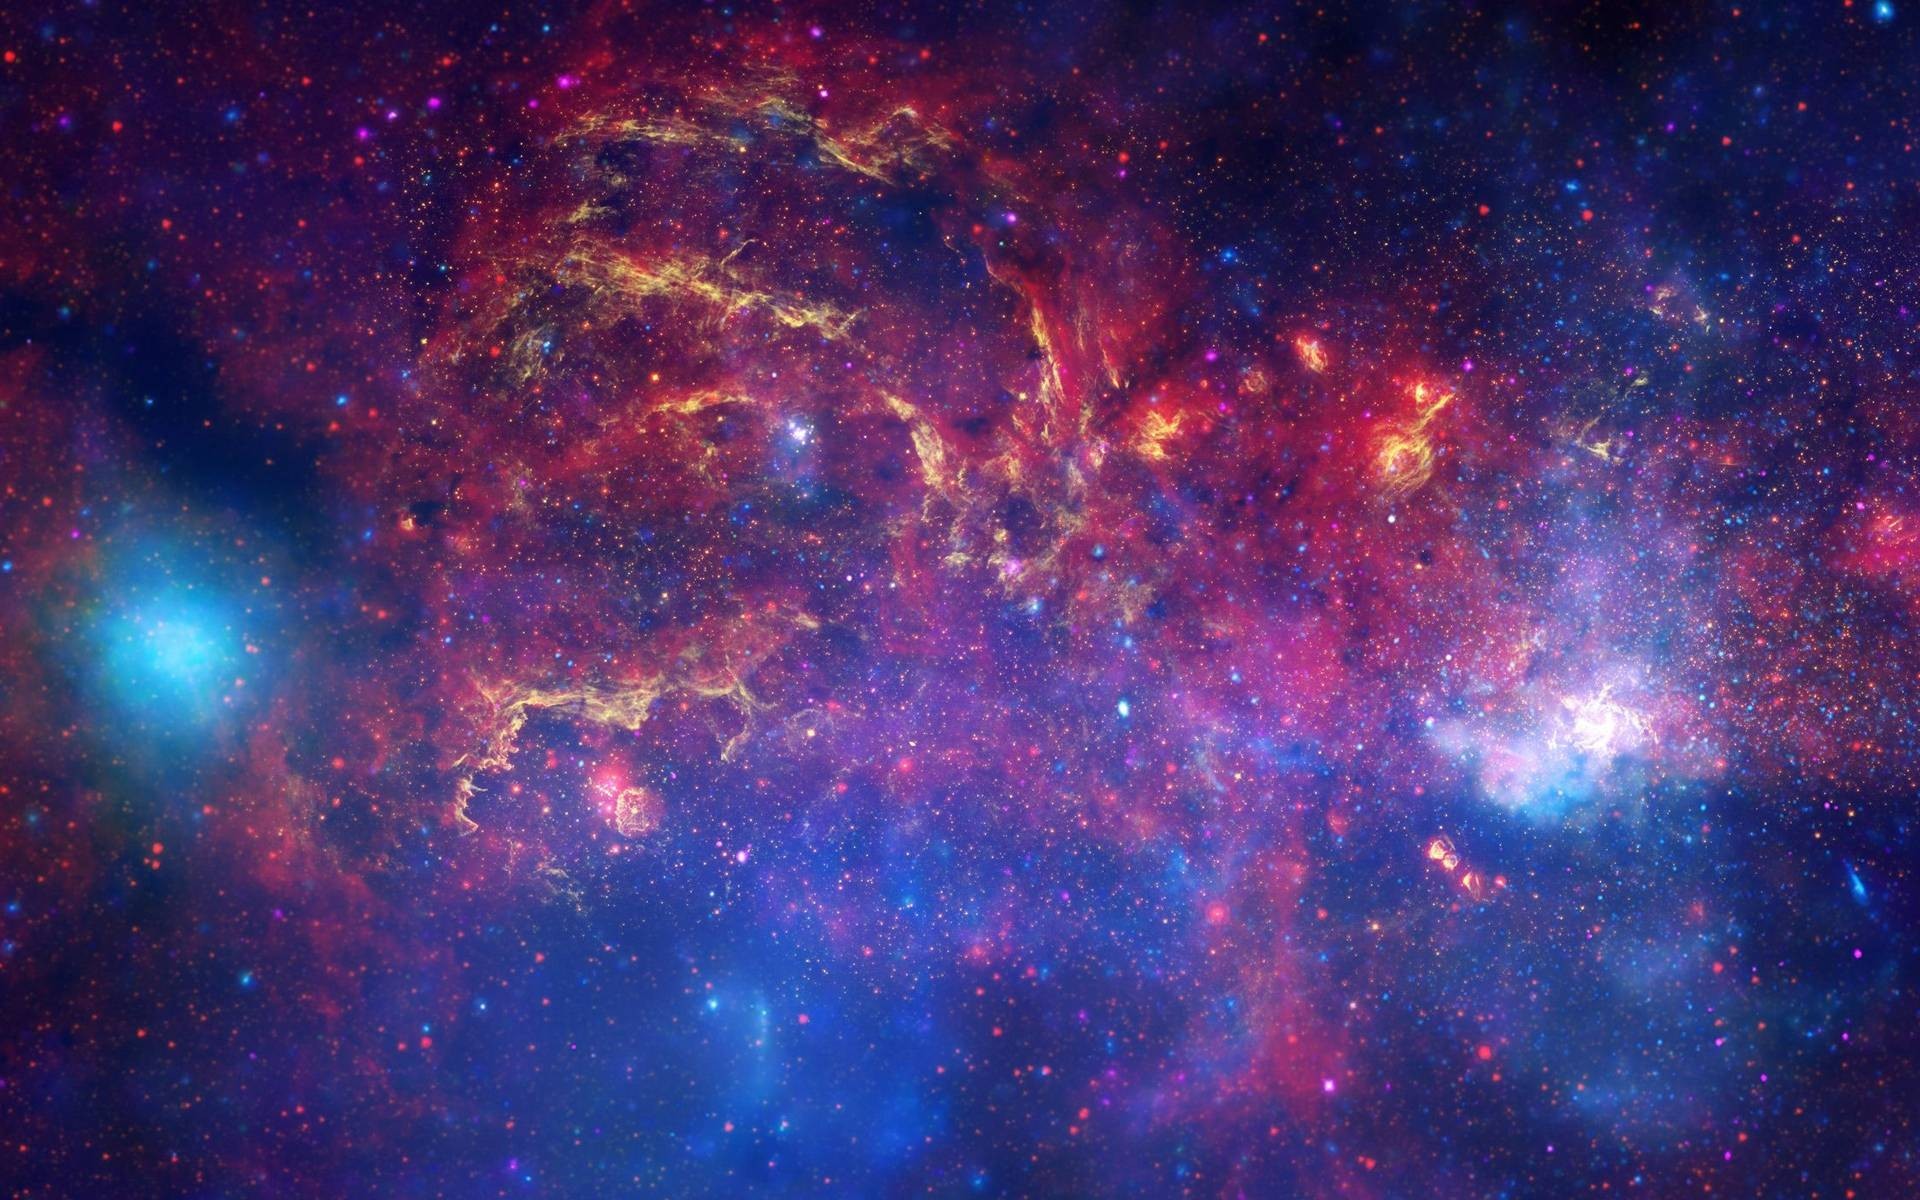 tumblr backgrounds space